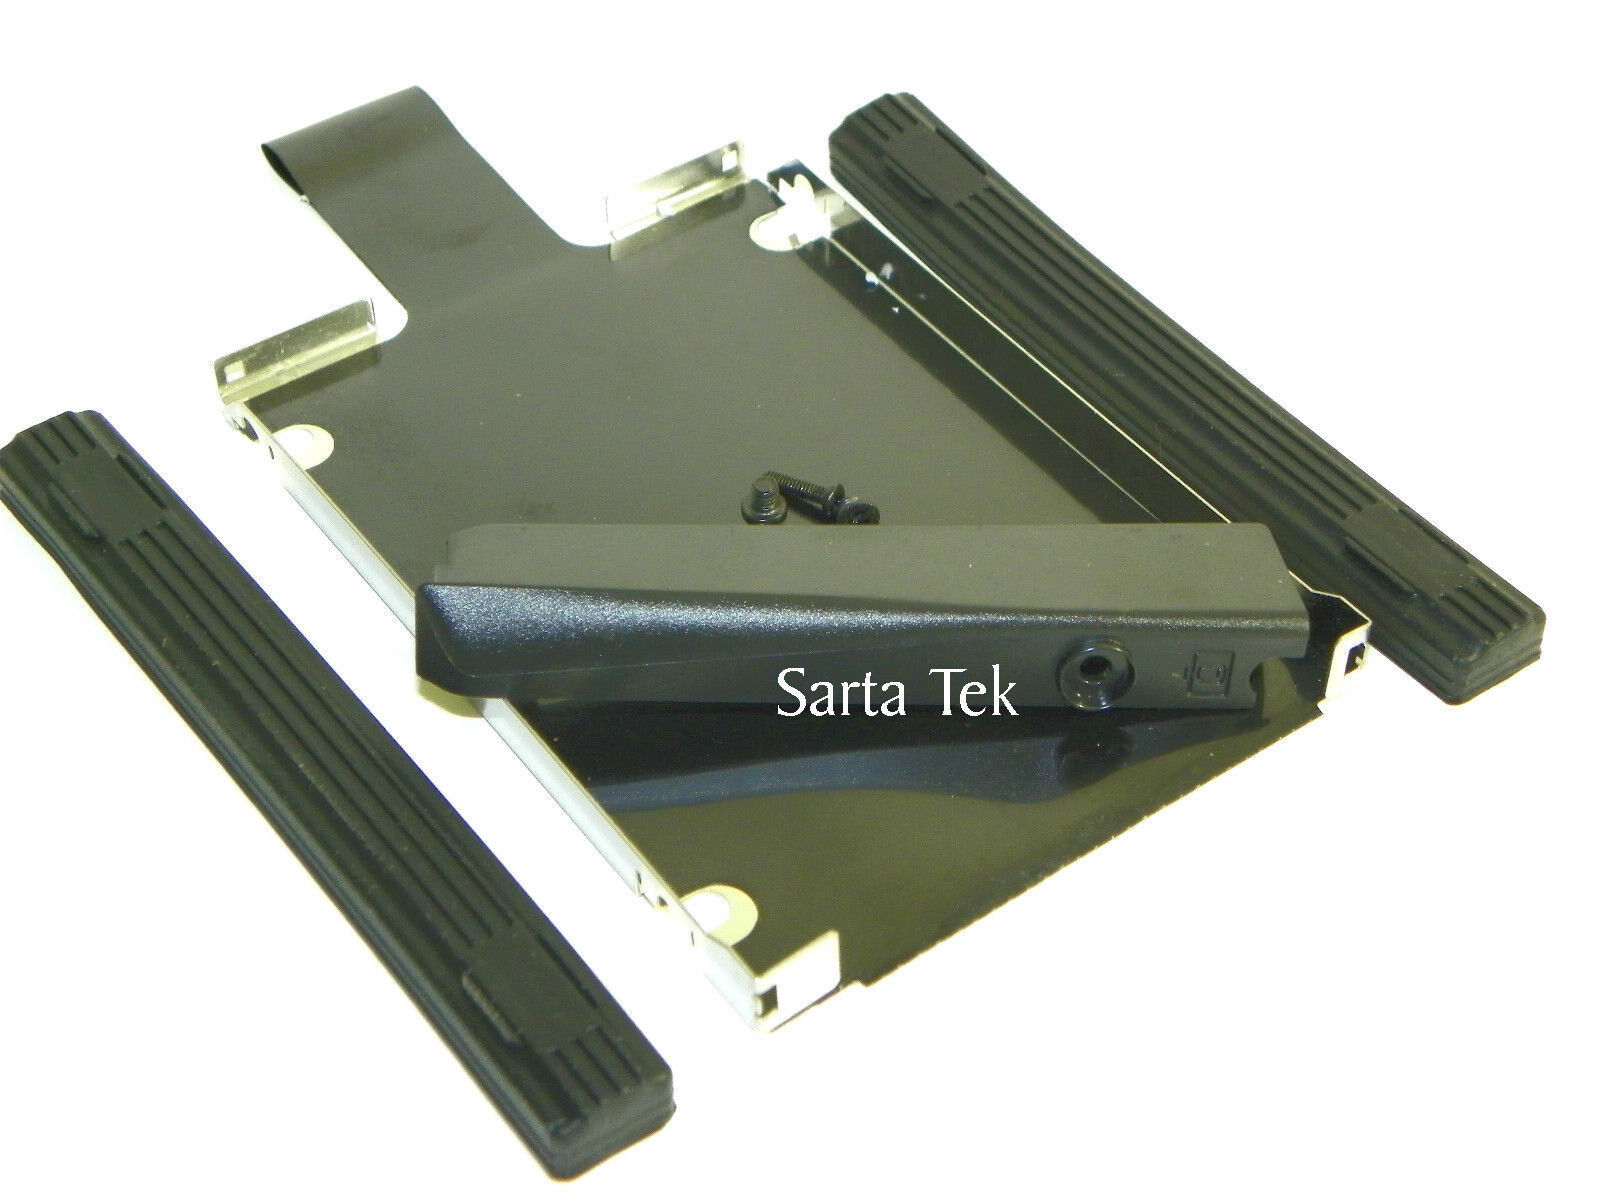 IBM Lenovo T61 T61P R61 Hard Drive Caddy 14" Wide screen Complete Kit New - $20.99